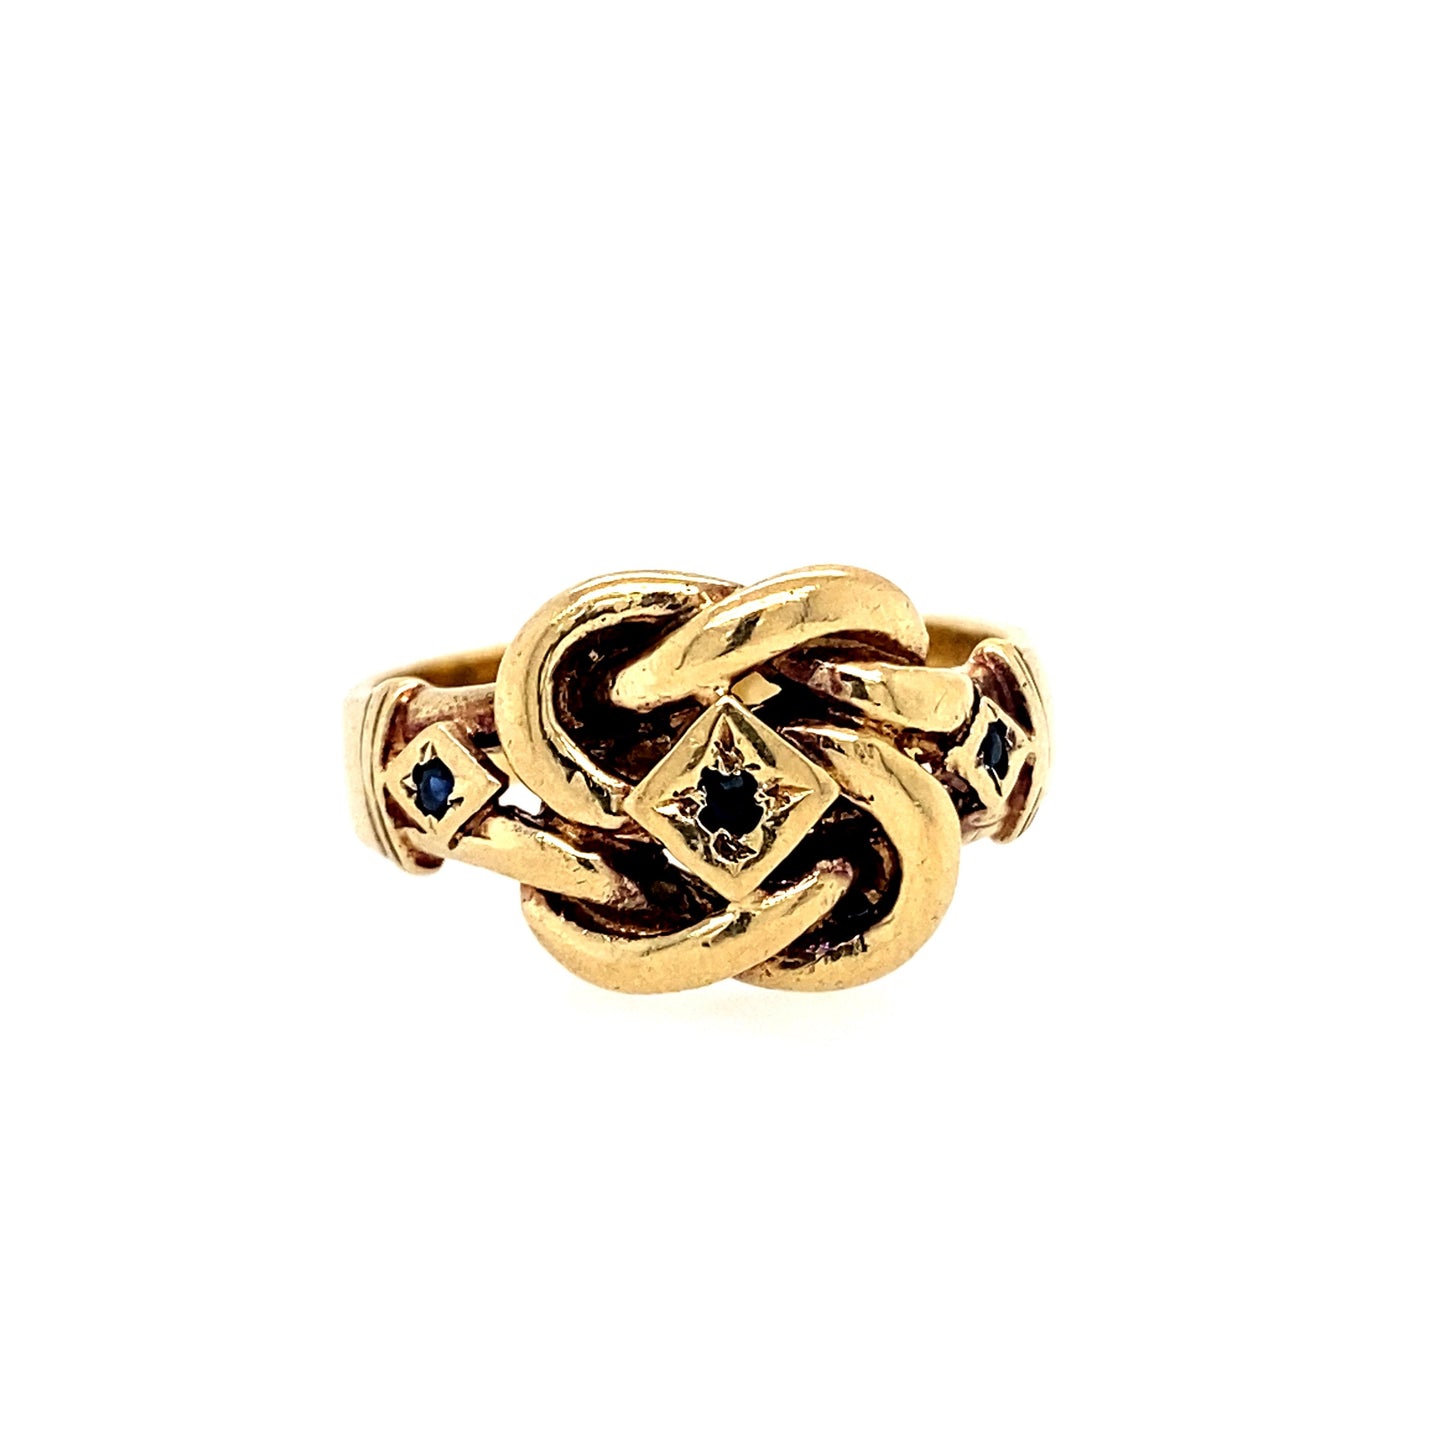 Vintage English Love Knot Ring in 9K Circa 1960's